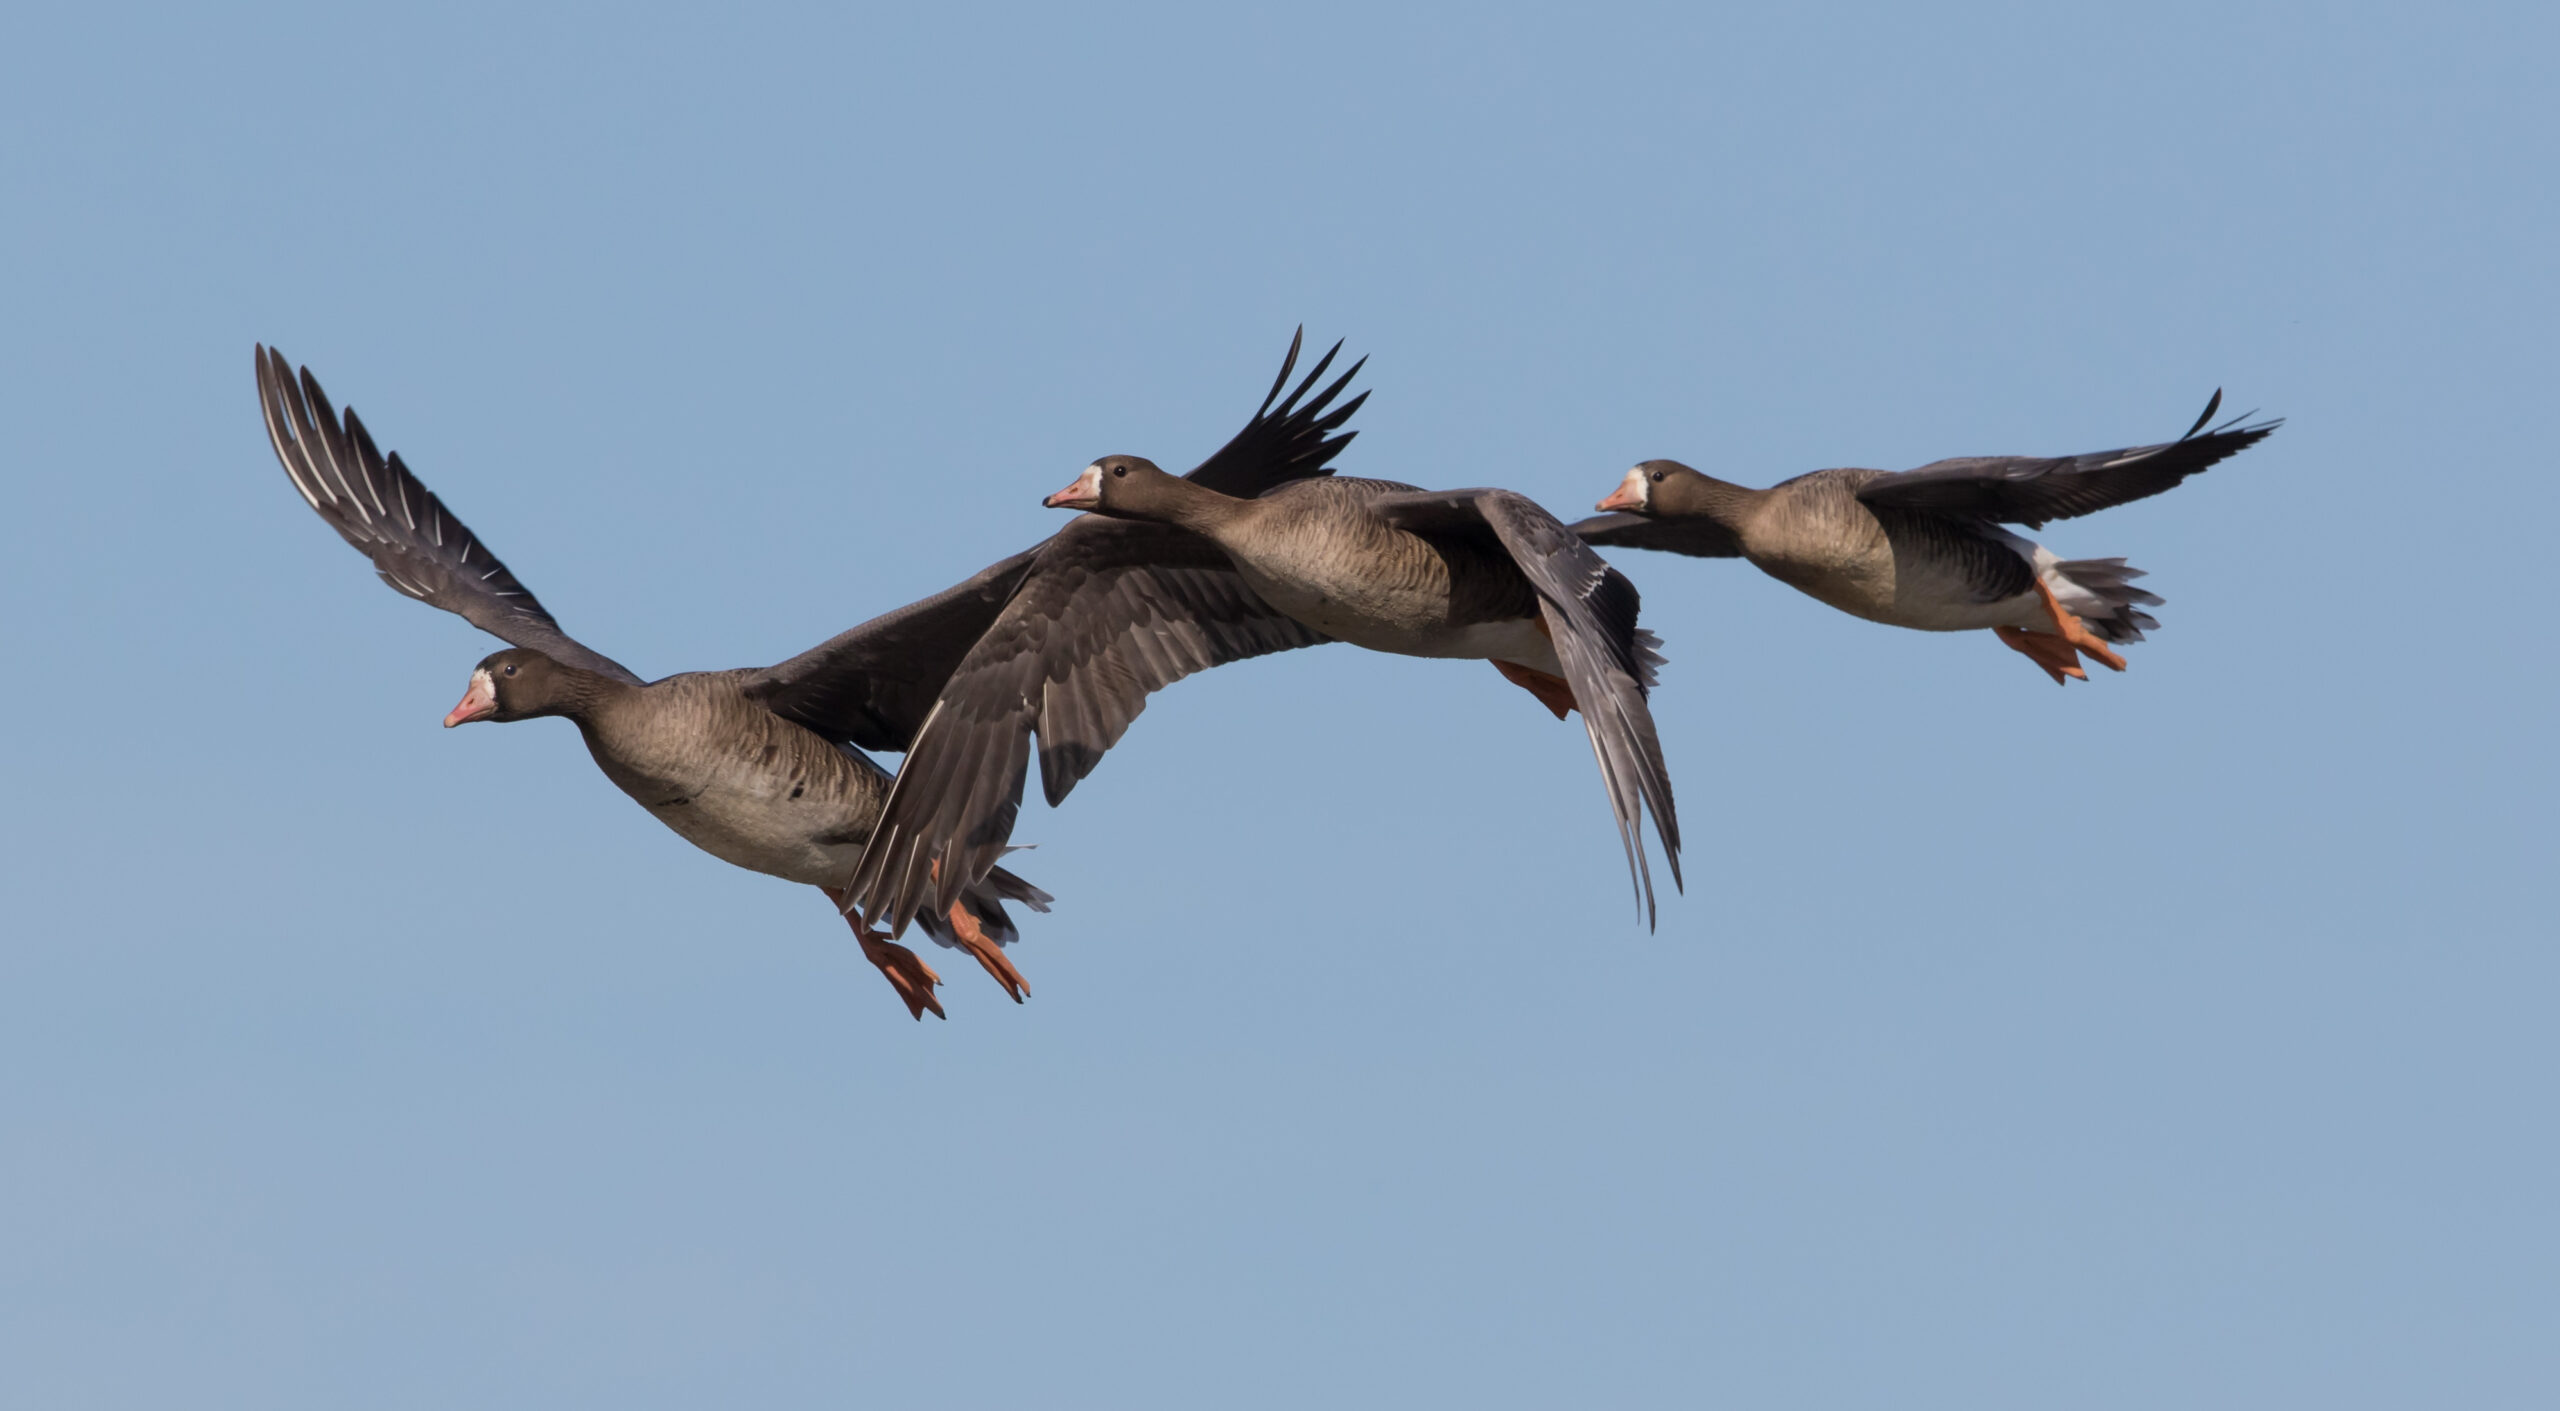 specklebelly juveniles flying they will be the hot ticket goose hunting in 2023